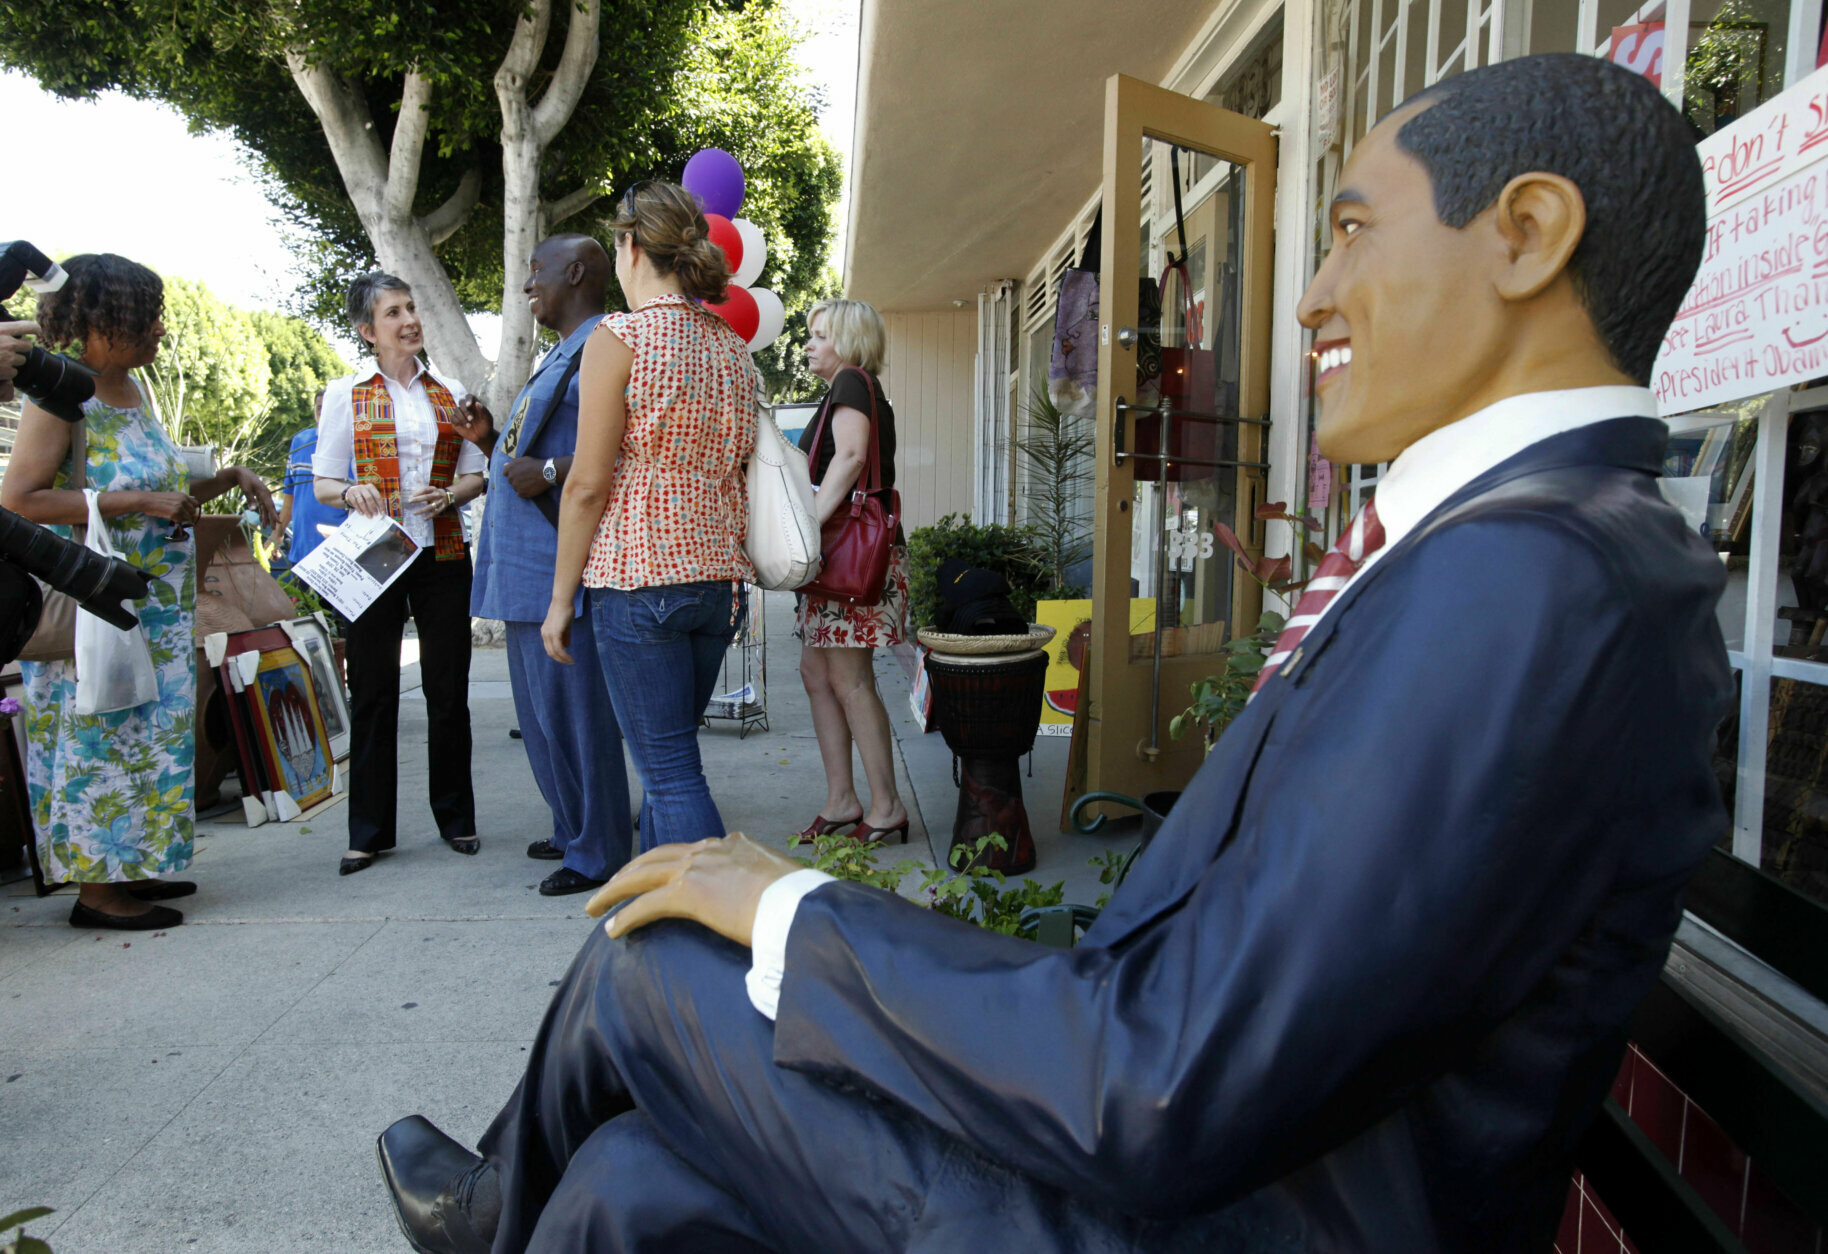 A figure of President Barack Obama on a park bench is in the foreground as Carly Fiorina, Republican nominee for the U.S. Senate from California, second from left, talks with people taduring a visit to a Juneteenth celebration at Leimert Park in the Crenshaw District of Los Angeles Saturday, June 19, 2010.  (AP Photo/Reed Saxon)